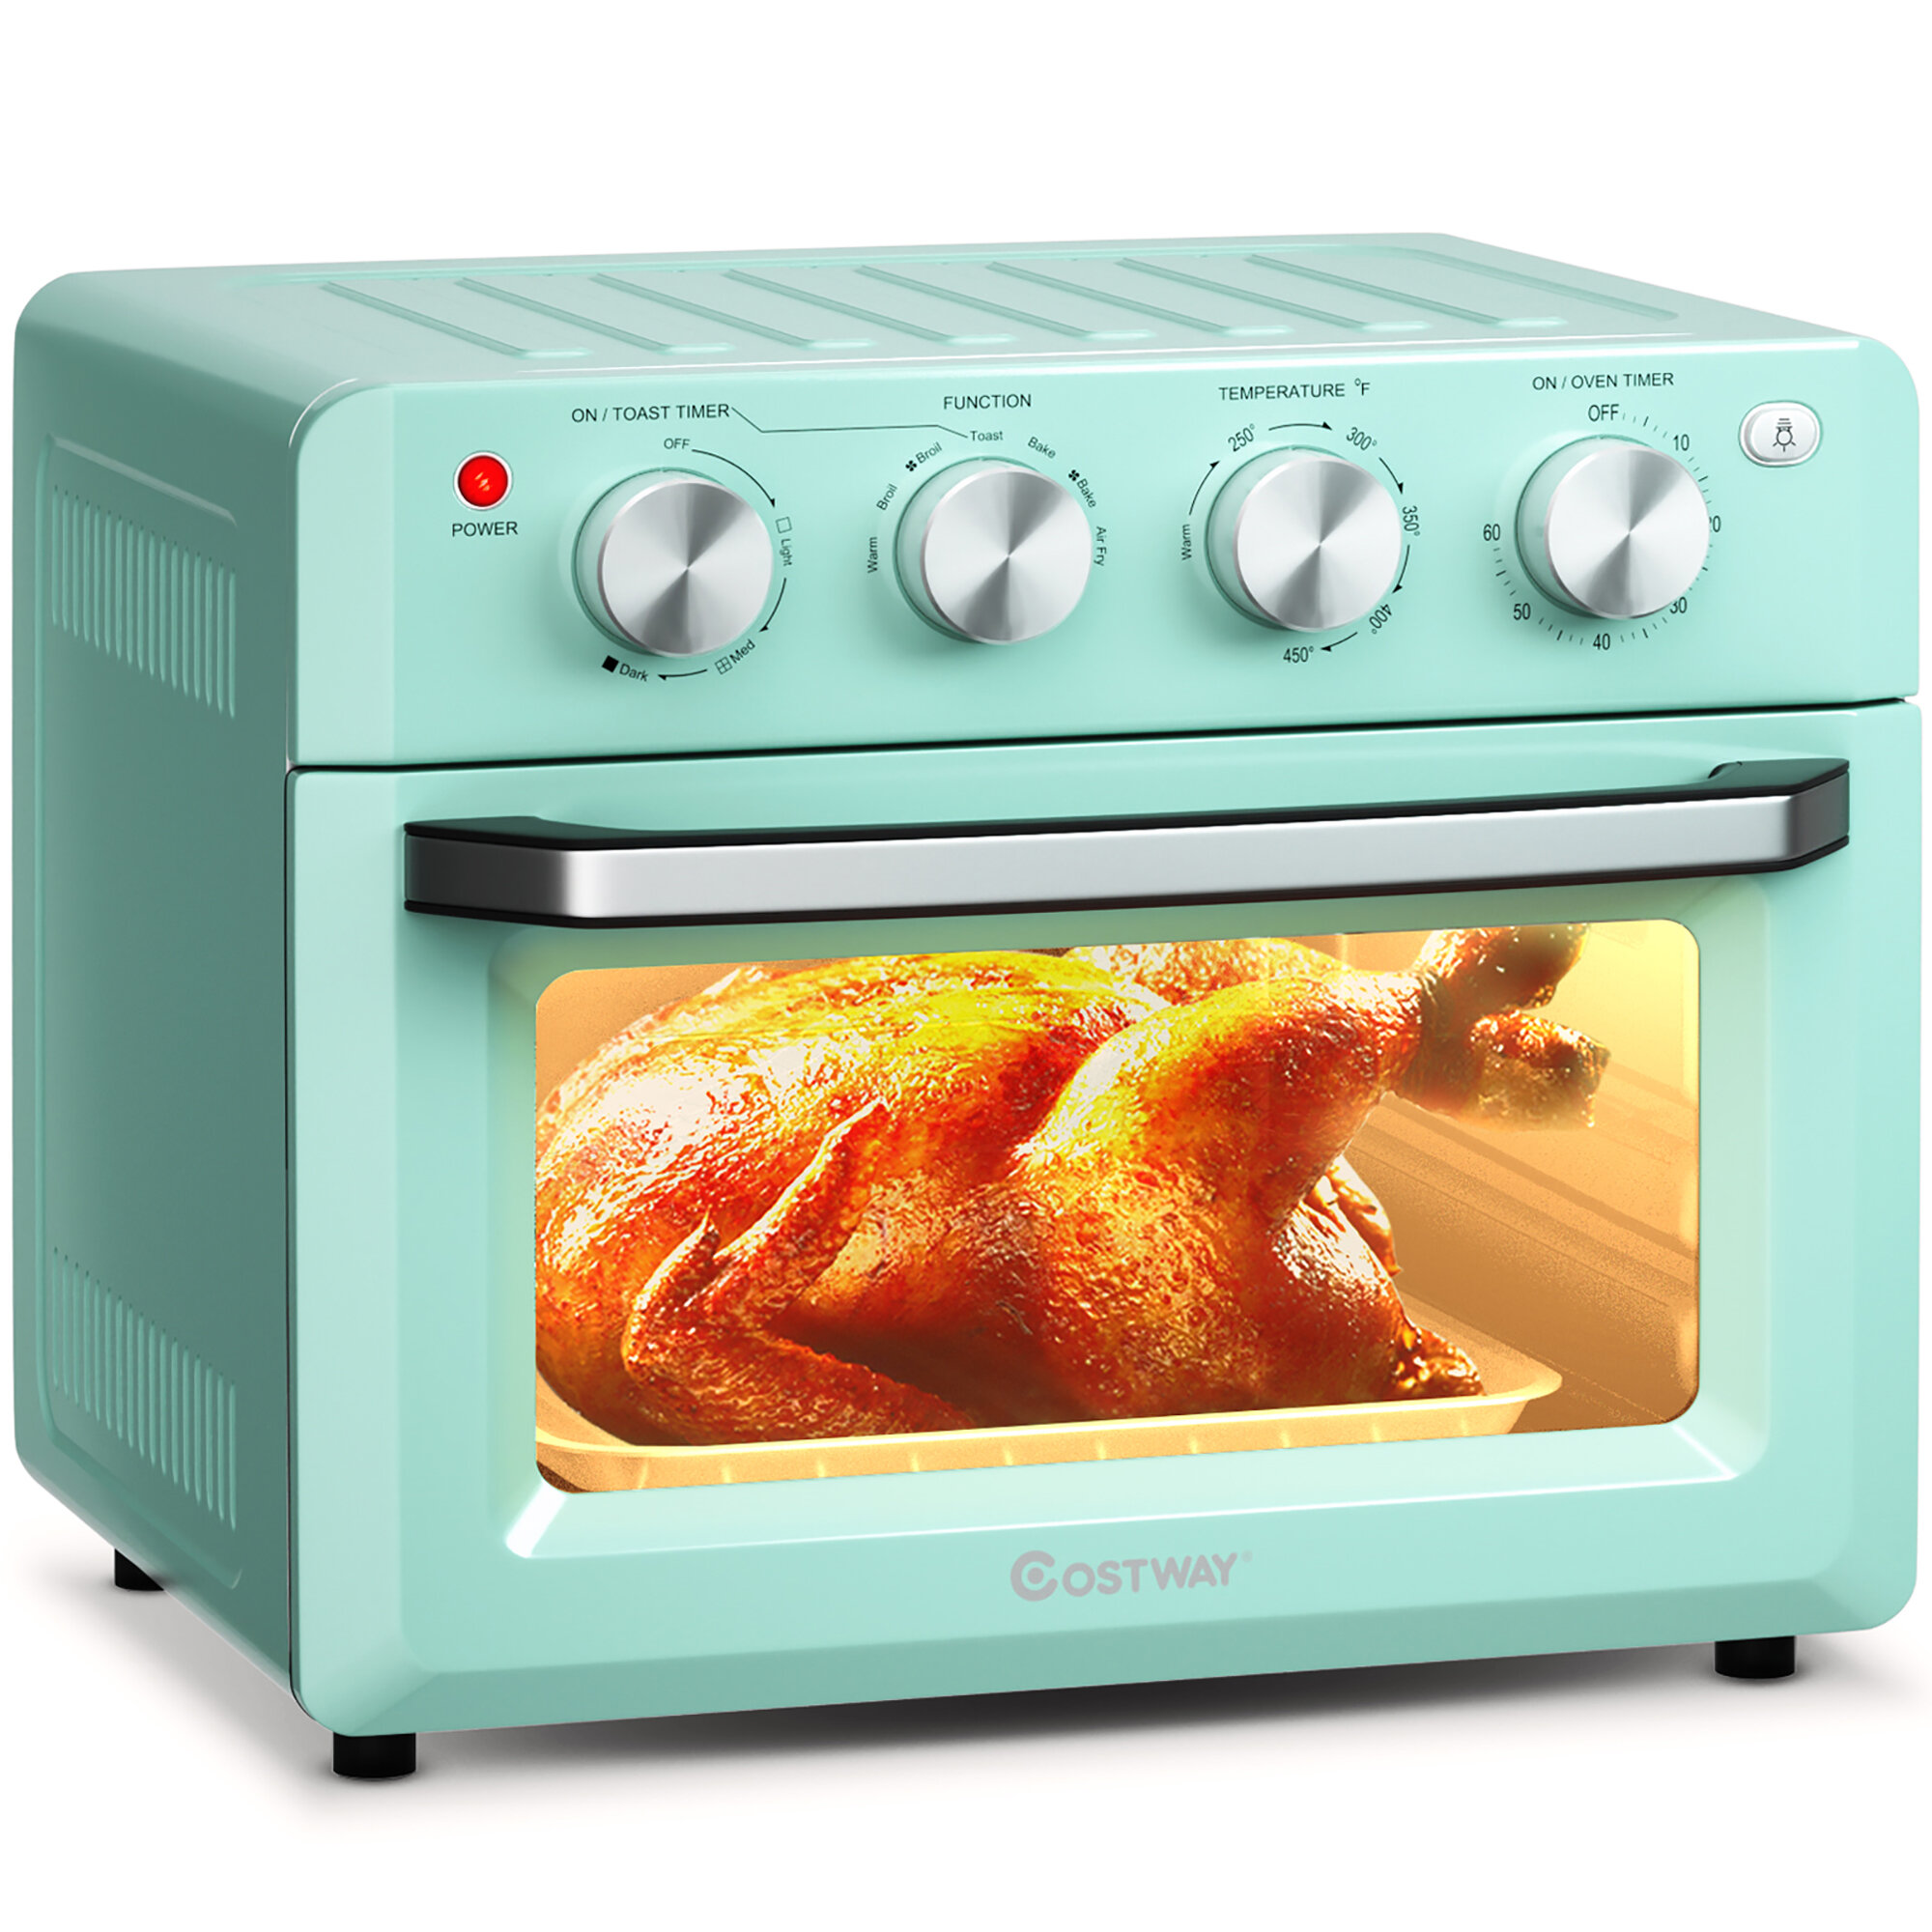 Black Decker Air Fryer/toaster Oven for Sale in Laud By Sea, FL